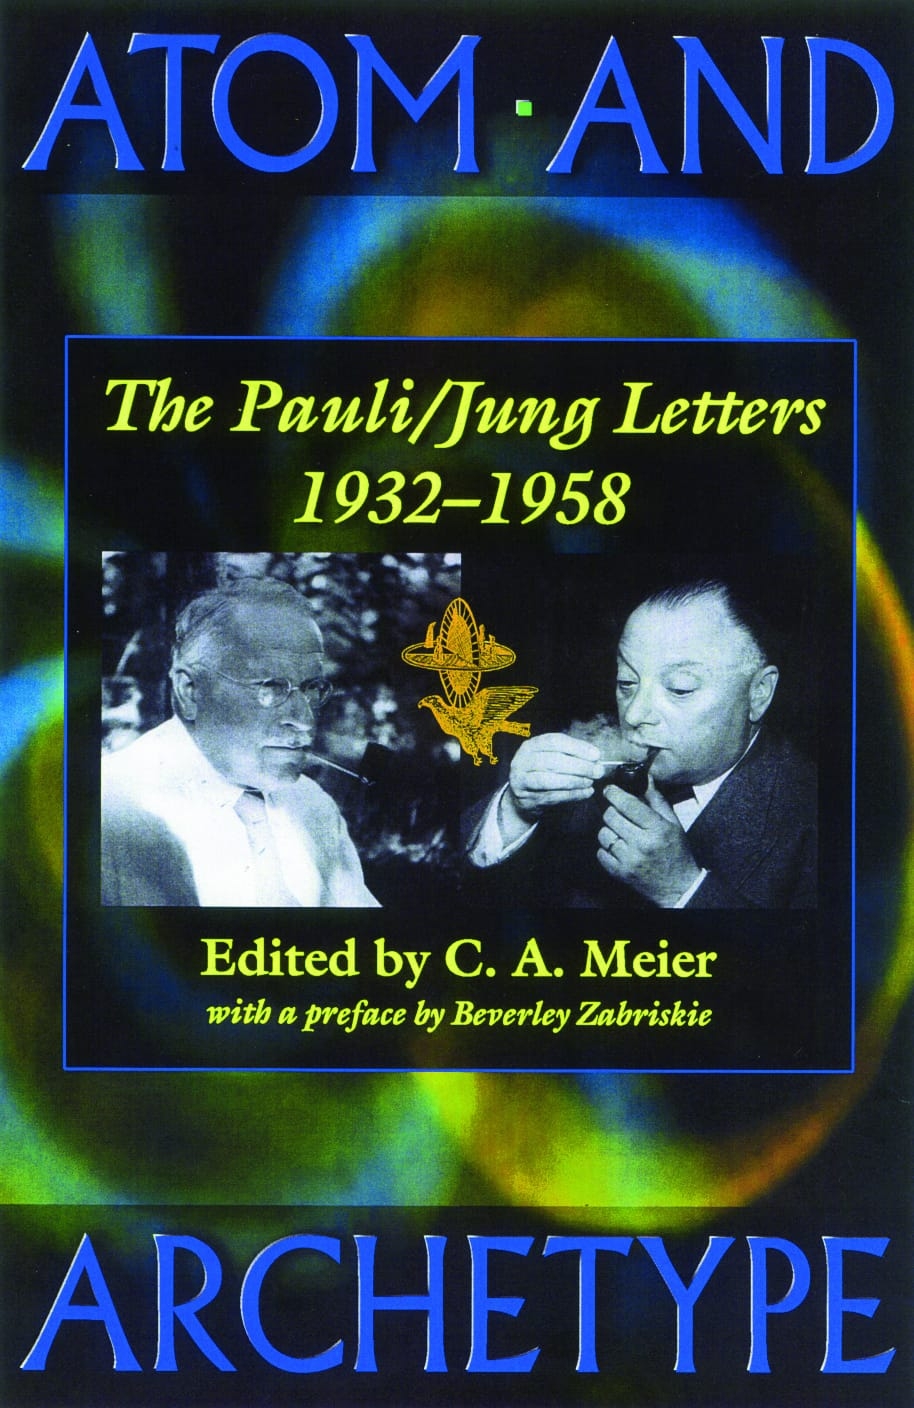 Atom and Archetype: The Pauli/ Jung Letters 1932-1958